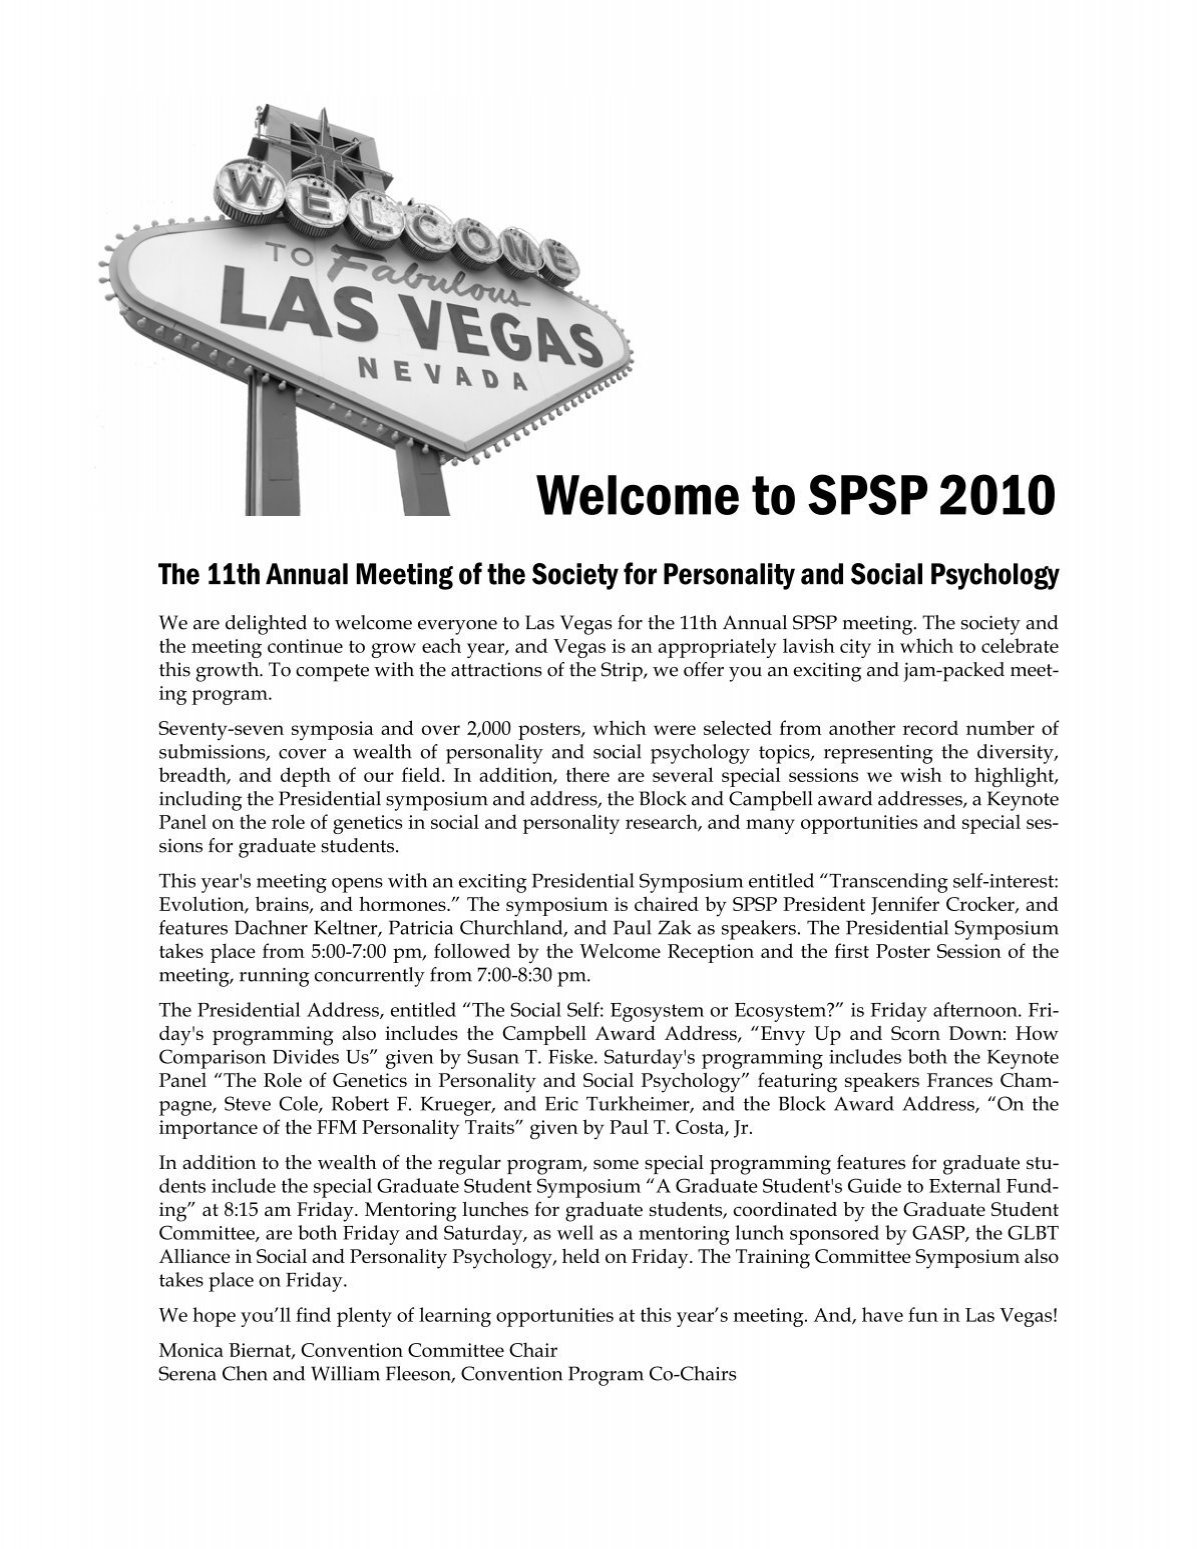 2010 Welcome SPSP to